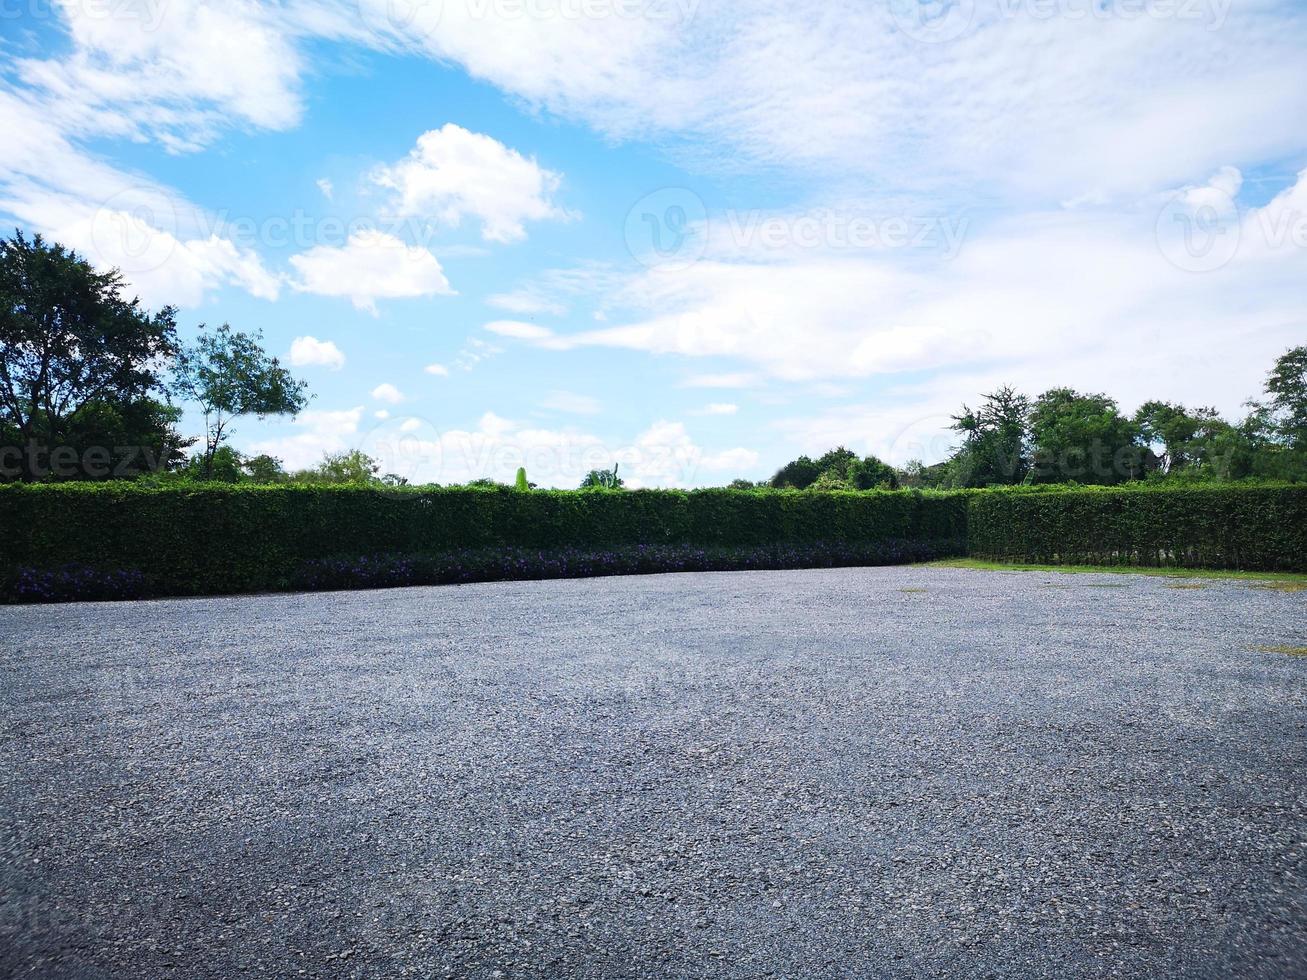 Parking lot sprinkled with gravel on tree bush nature background photo